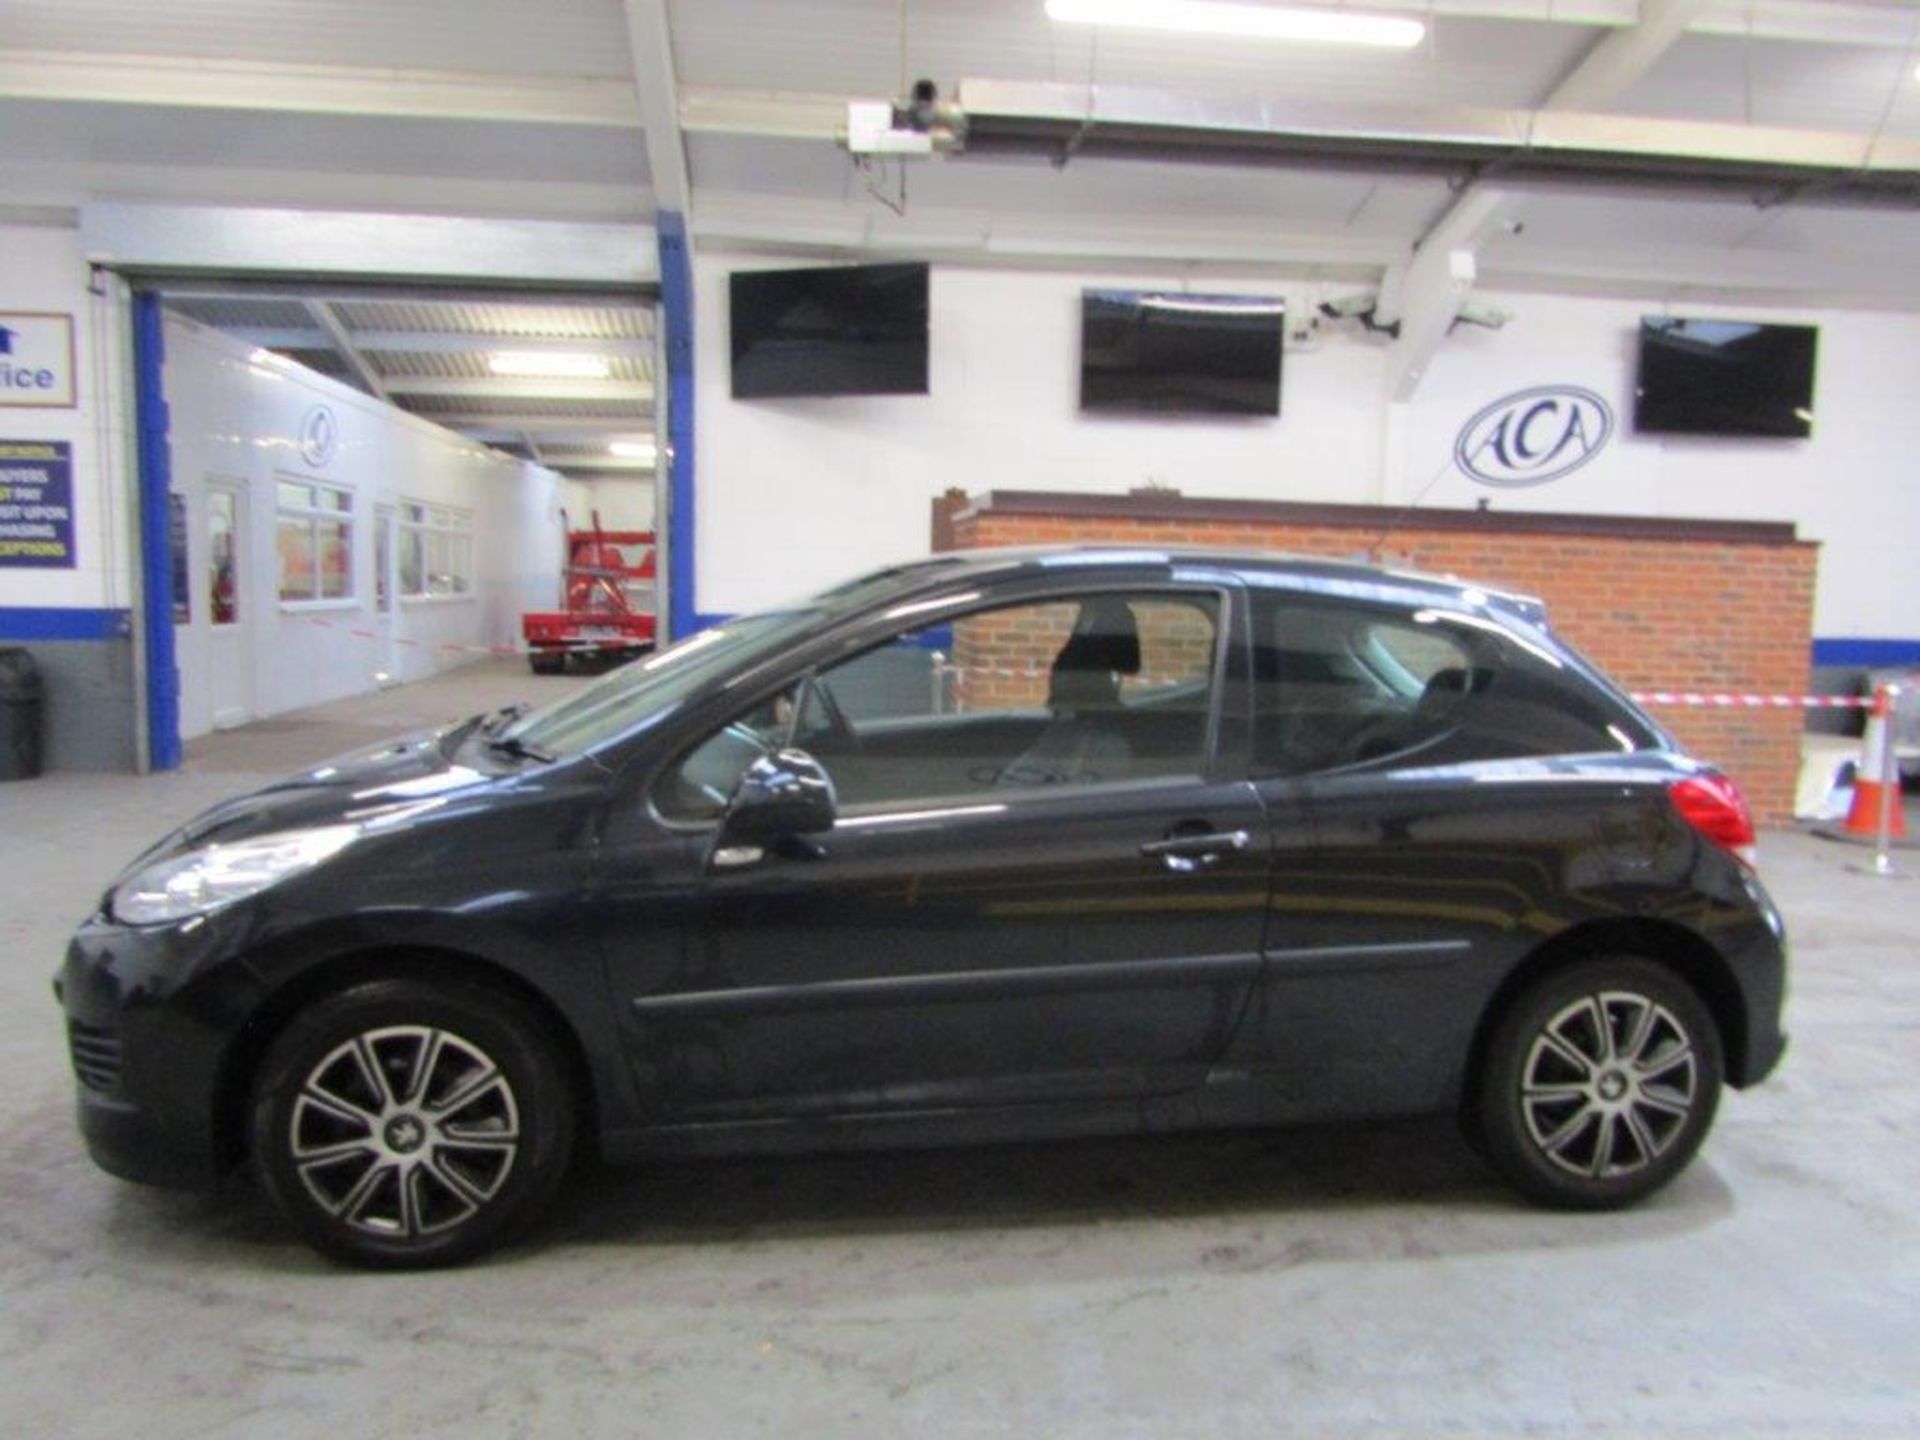 60 10 Peugeot 207 S HDi - Image 18 of 18